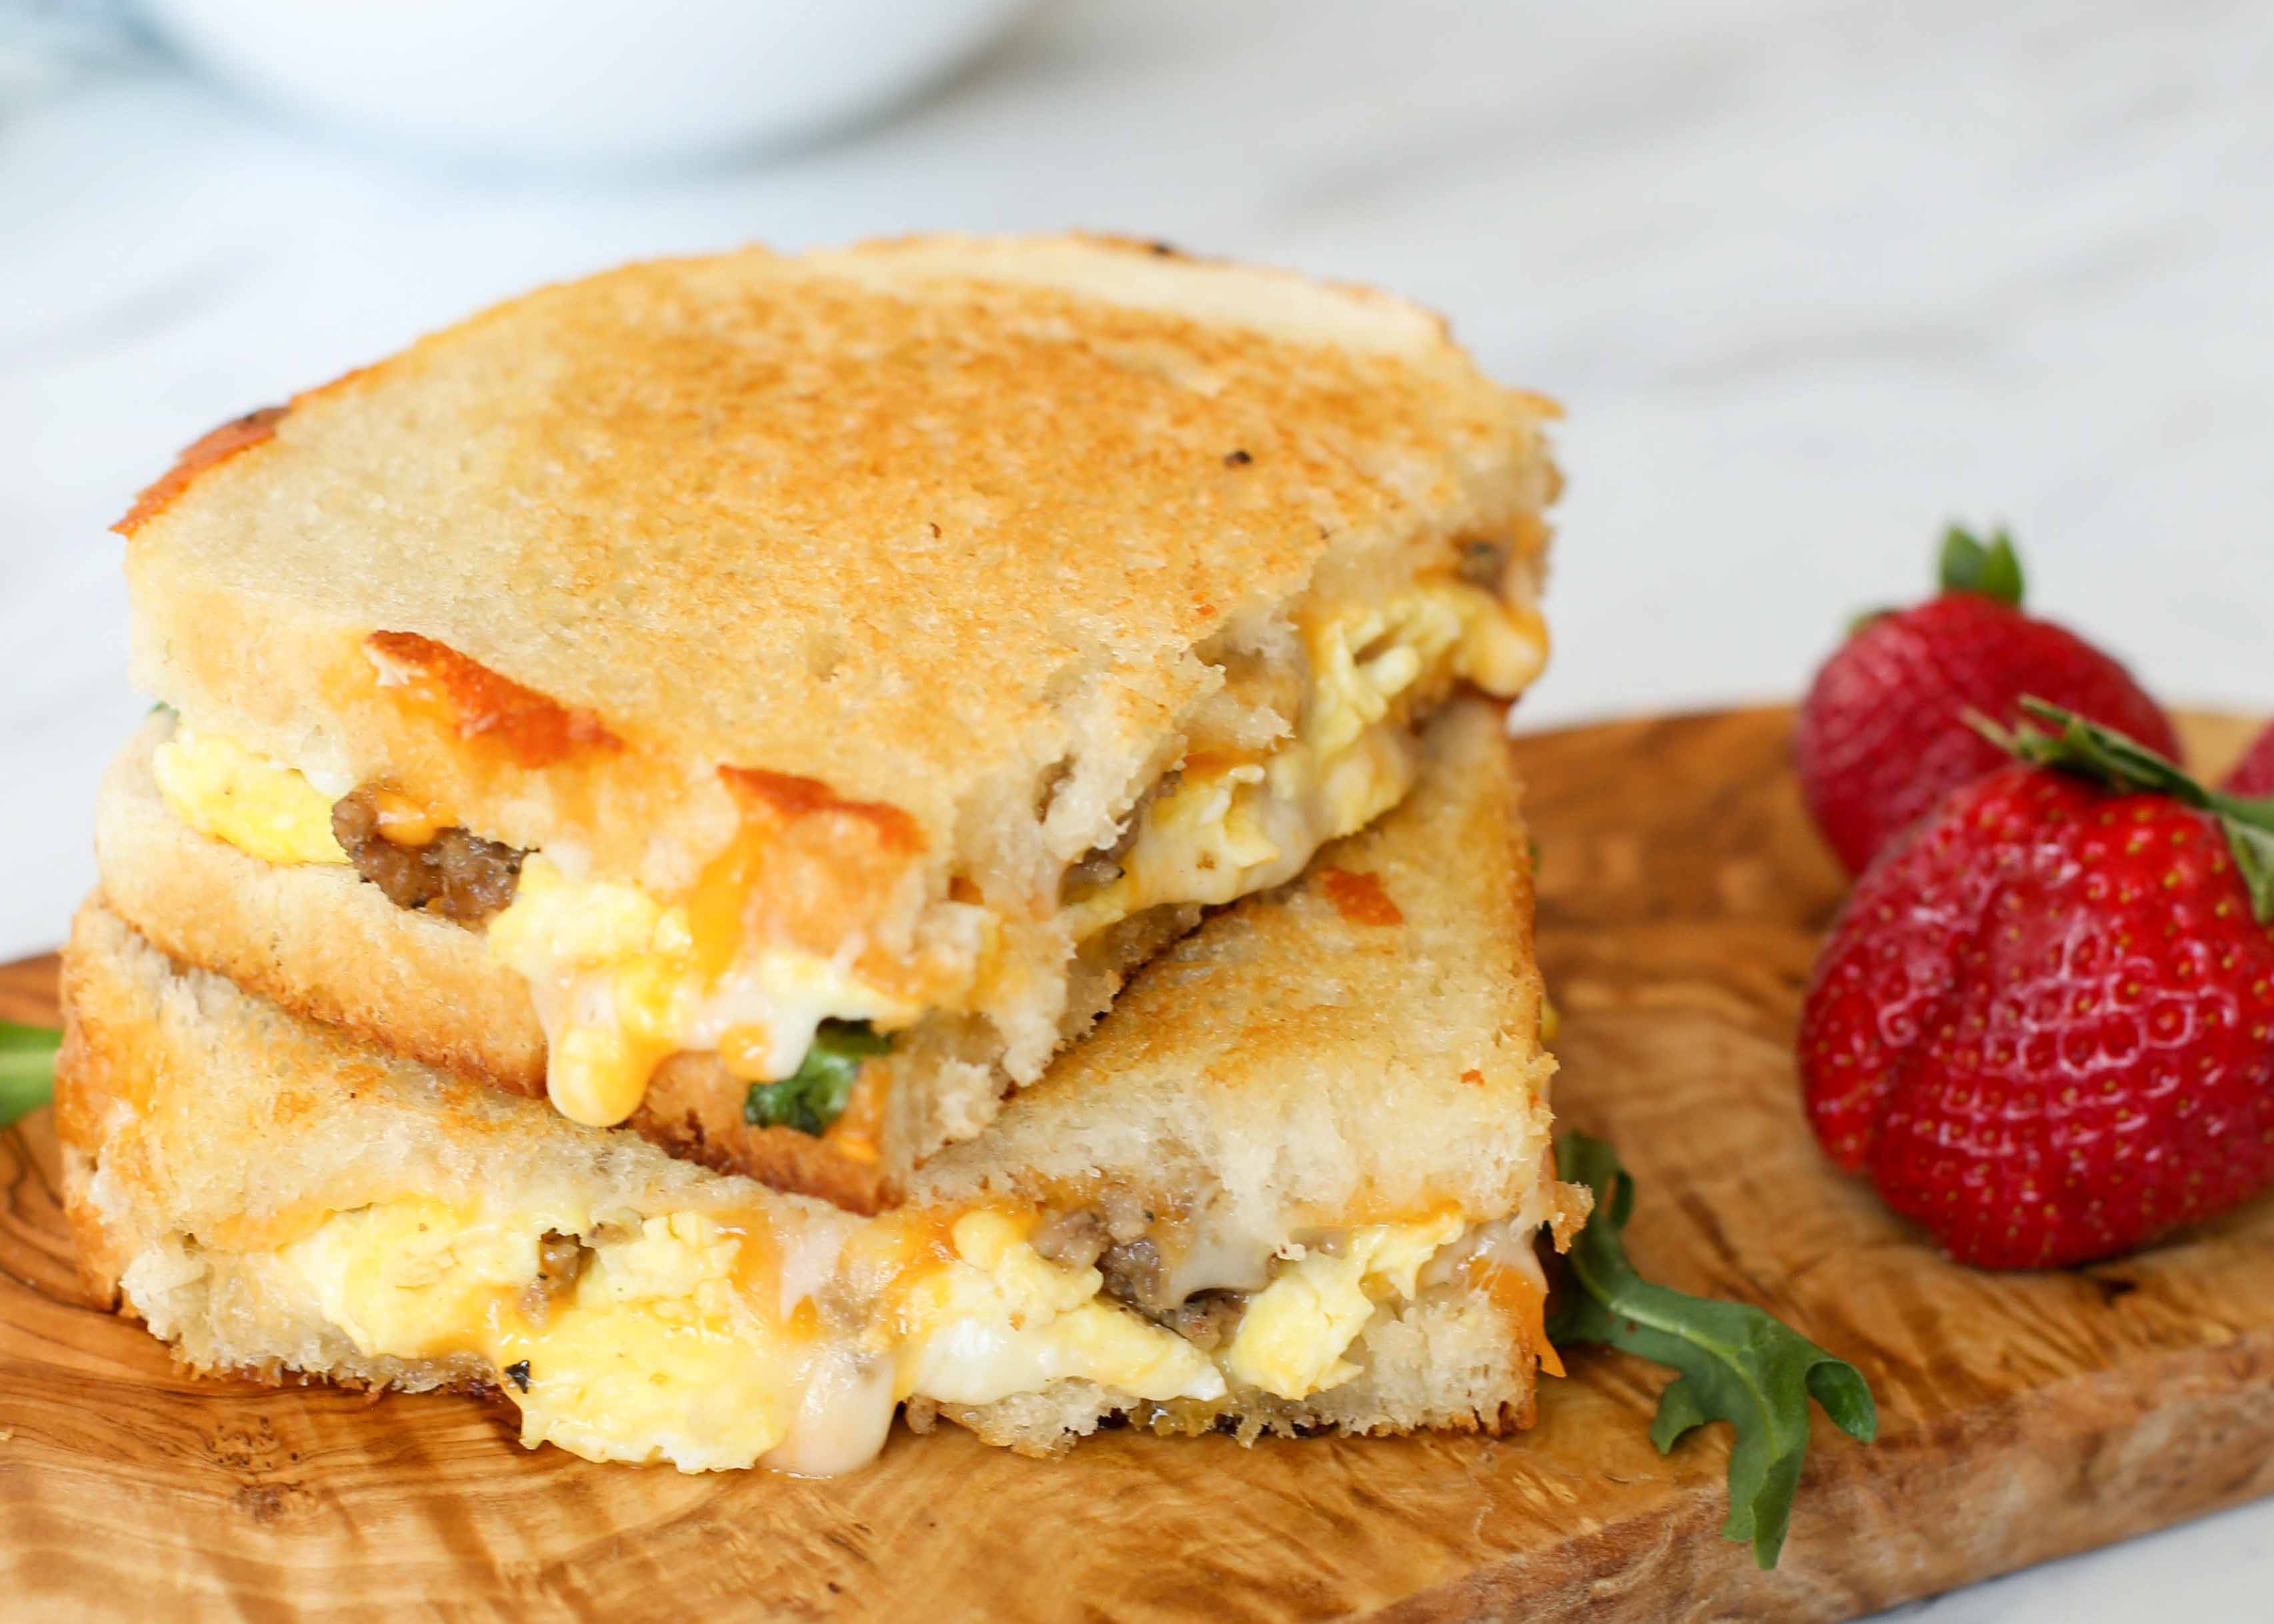 Grilled Egg & Cheese Sandwich - CPA: Certified Pastry Aficionado